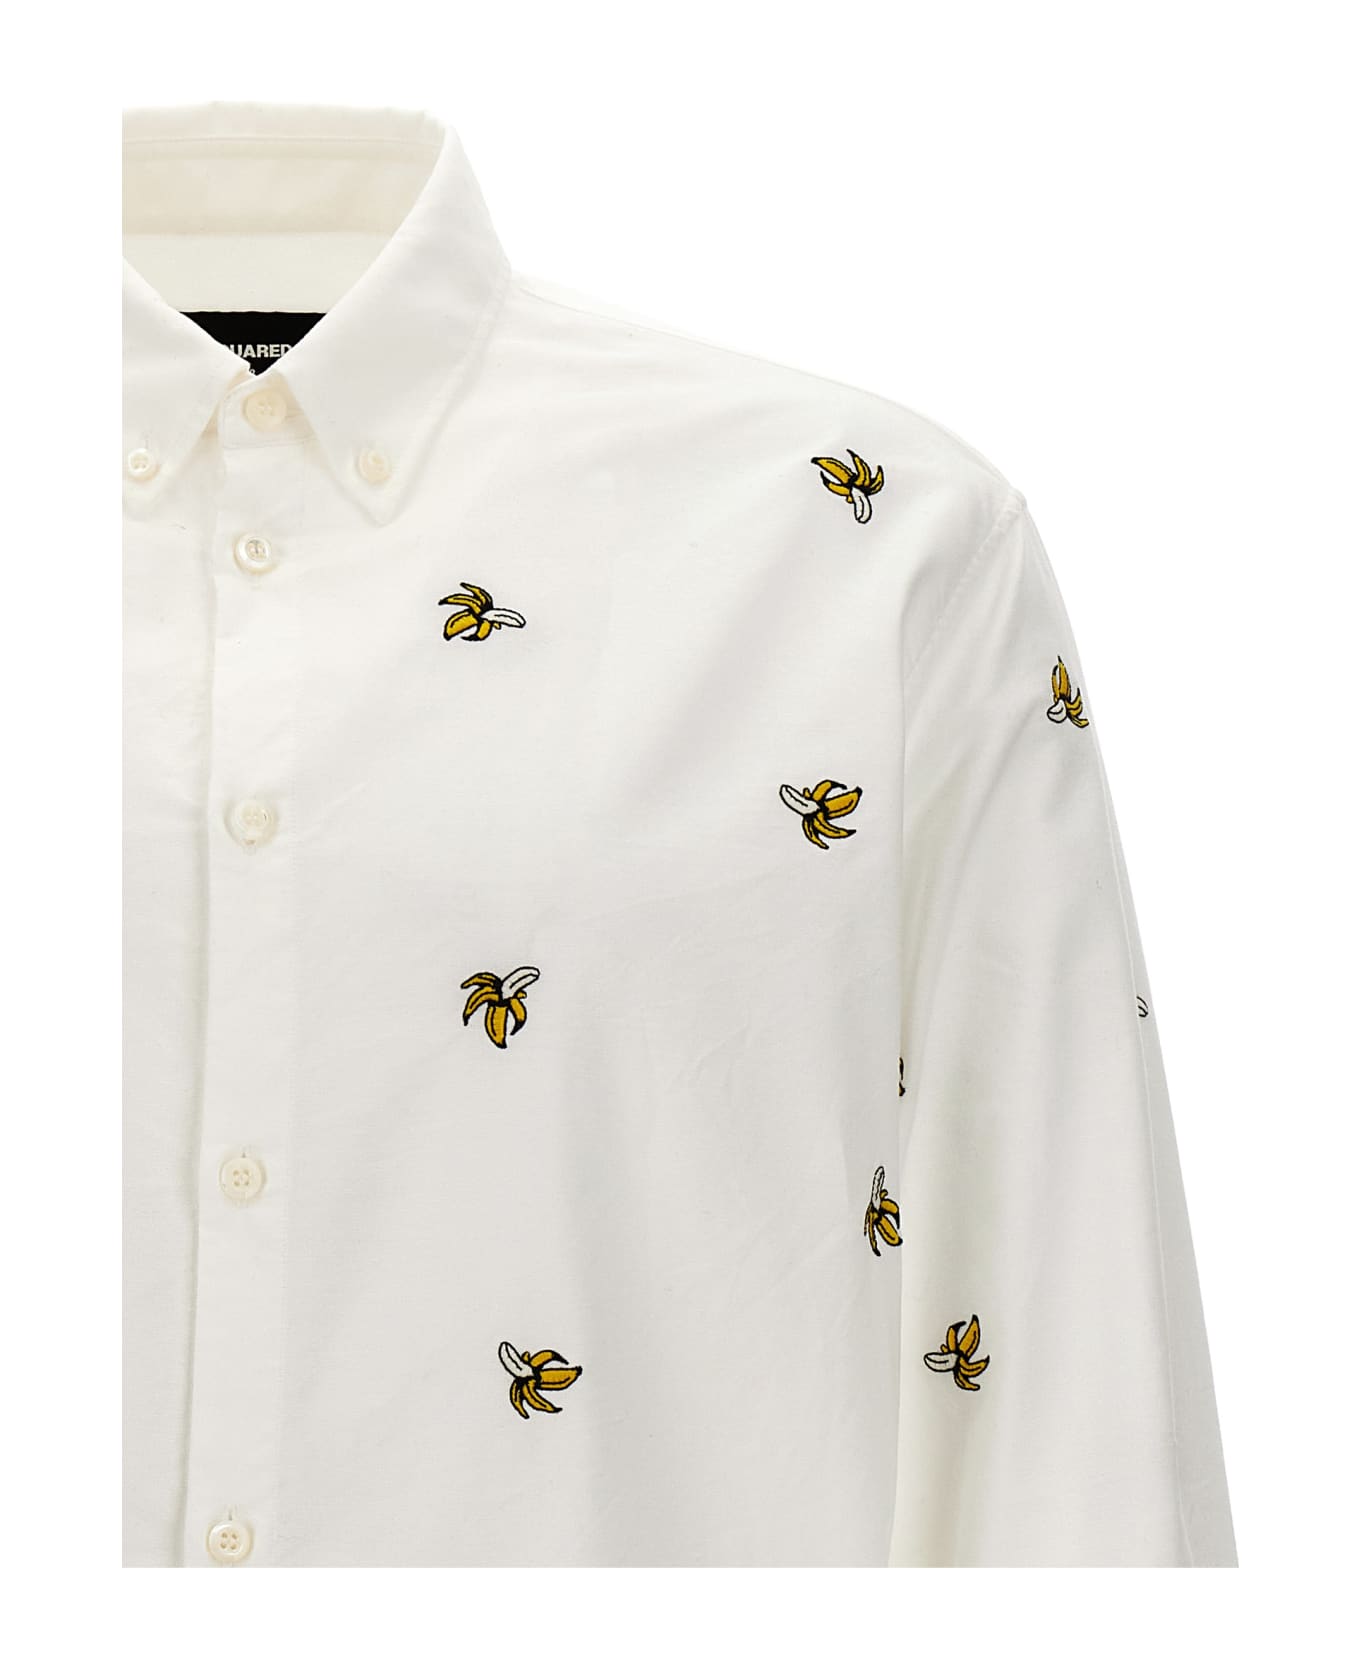 Dsquared2 'fruit Embroidery' Shirt - White シャツ